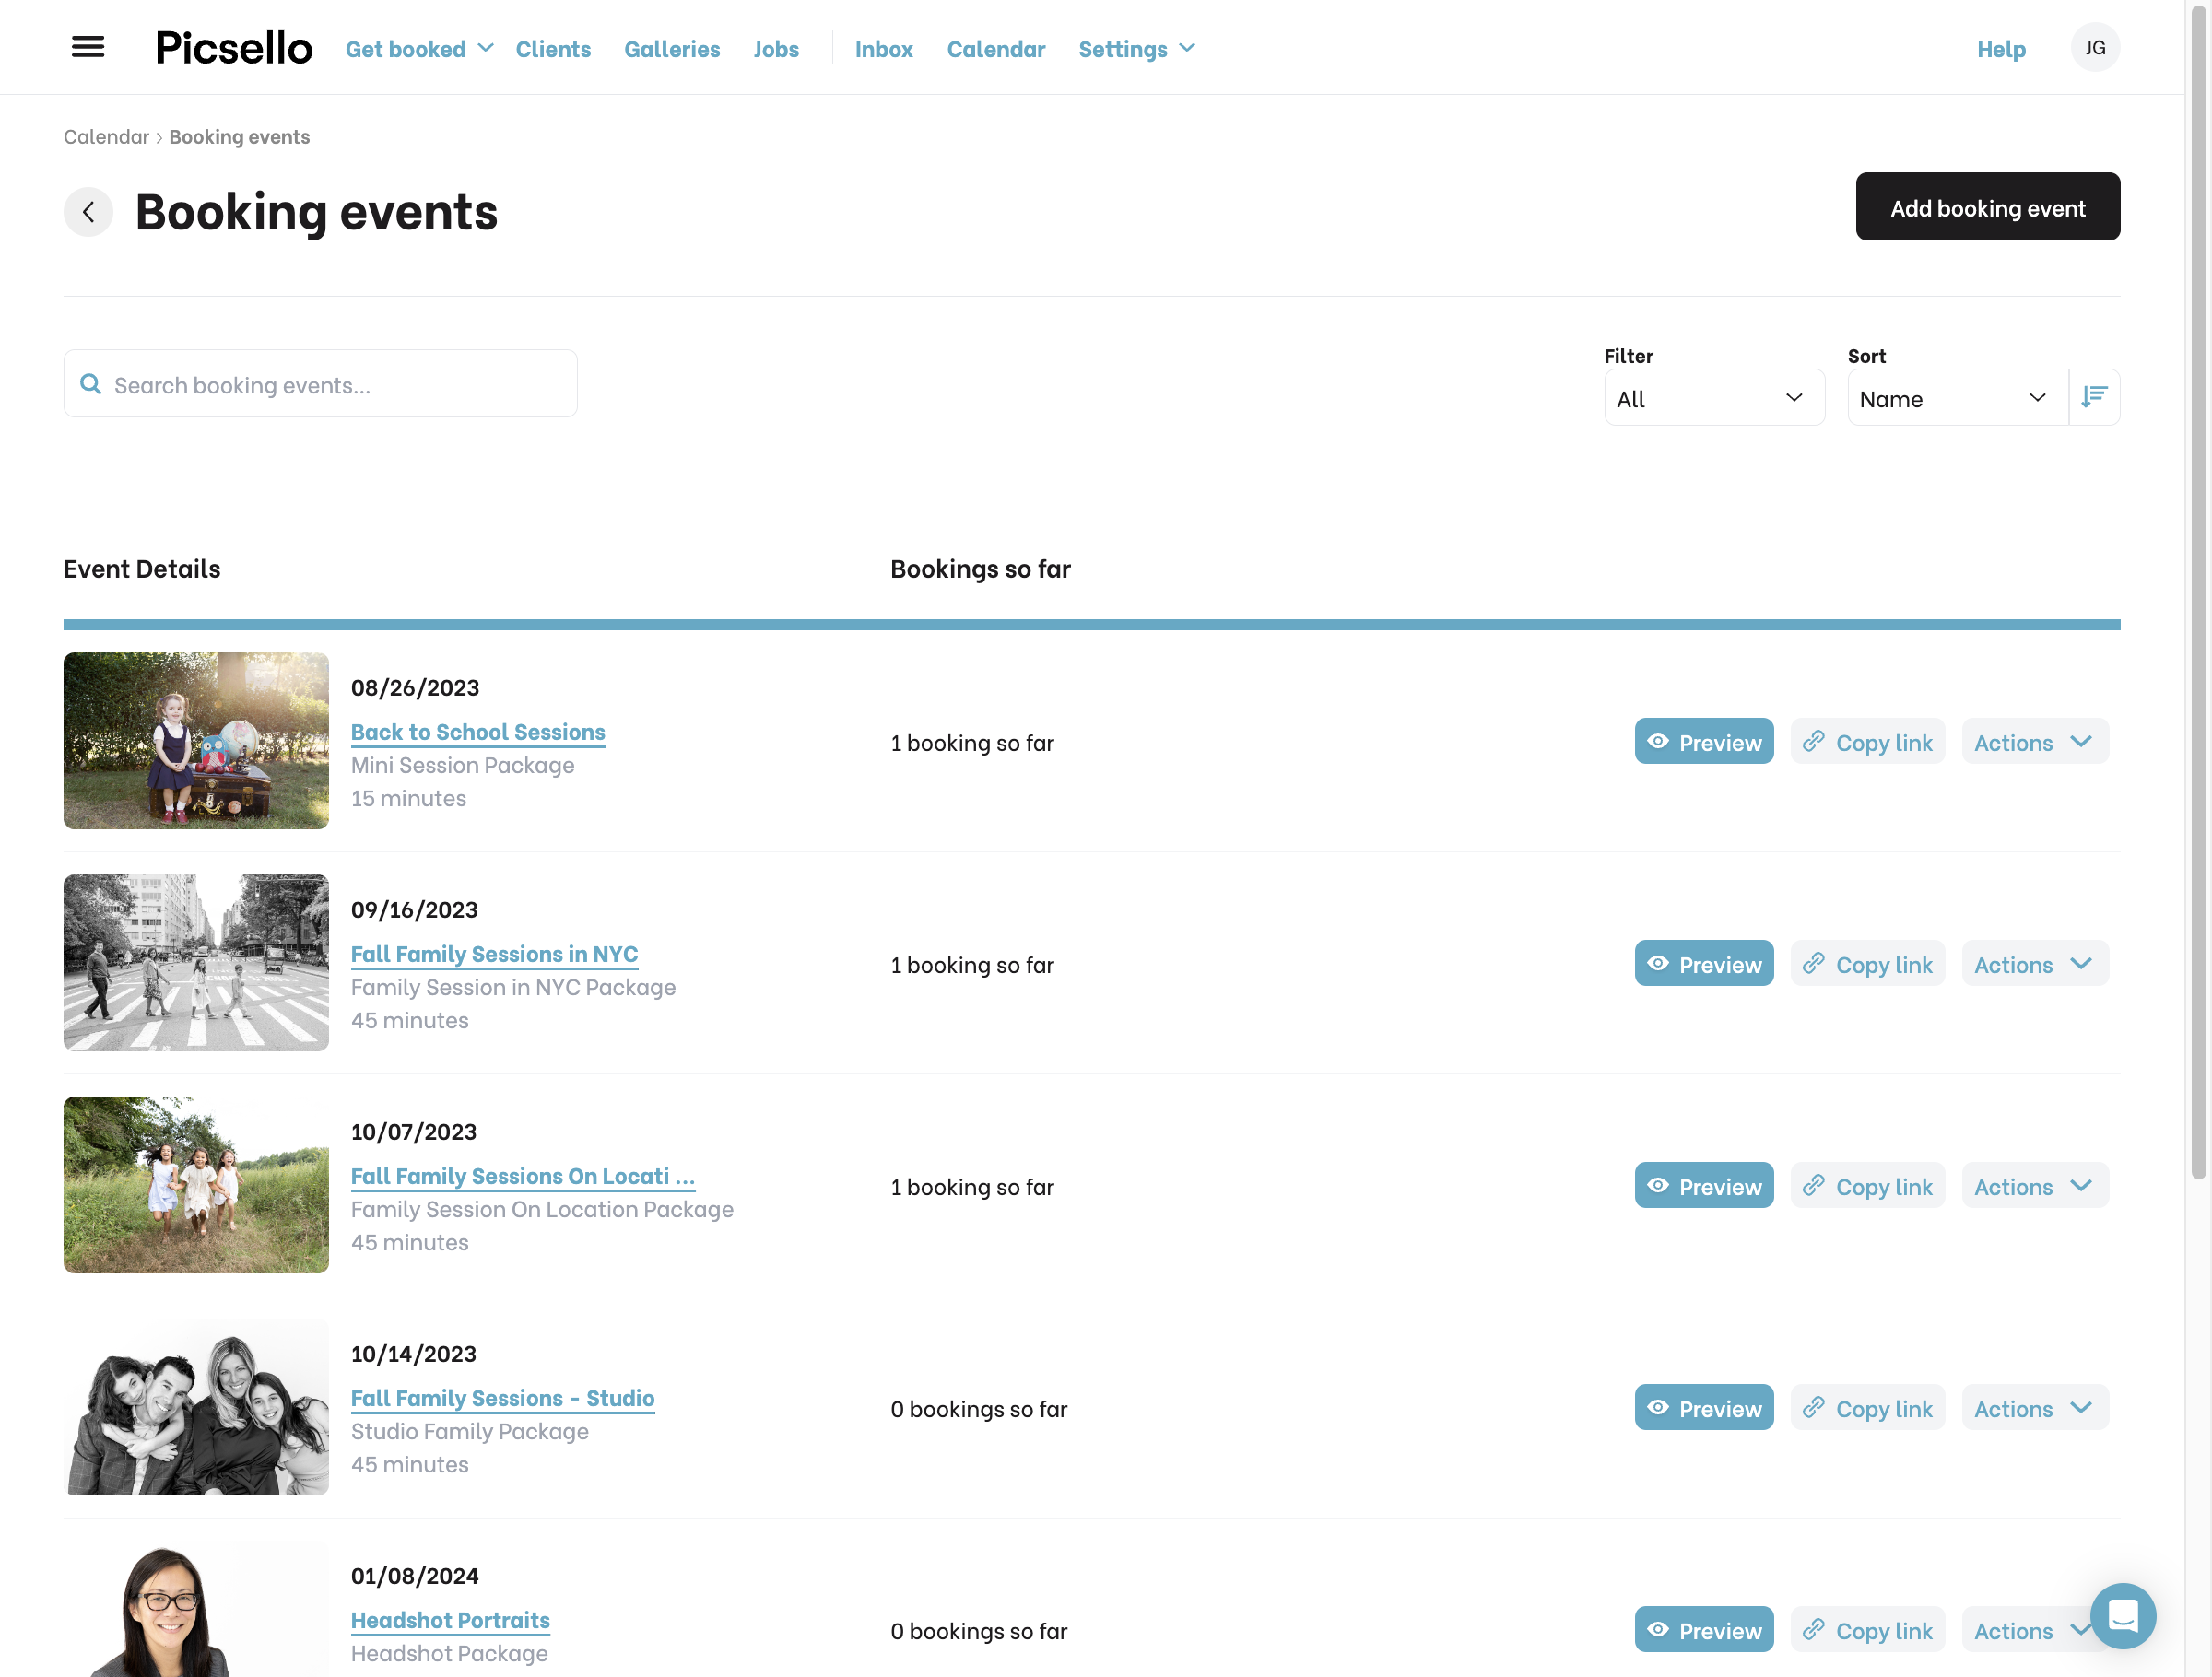 Add a new booking event by clicking here.